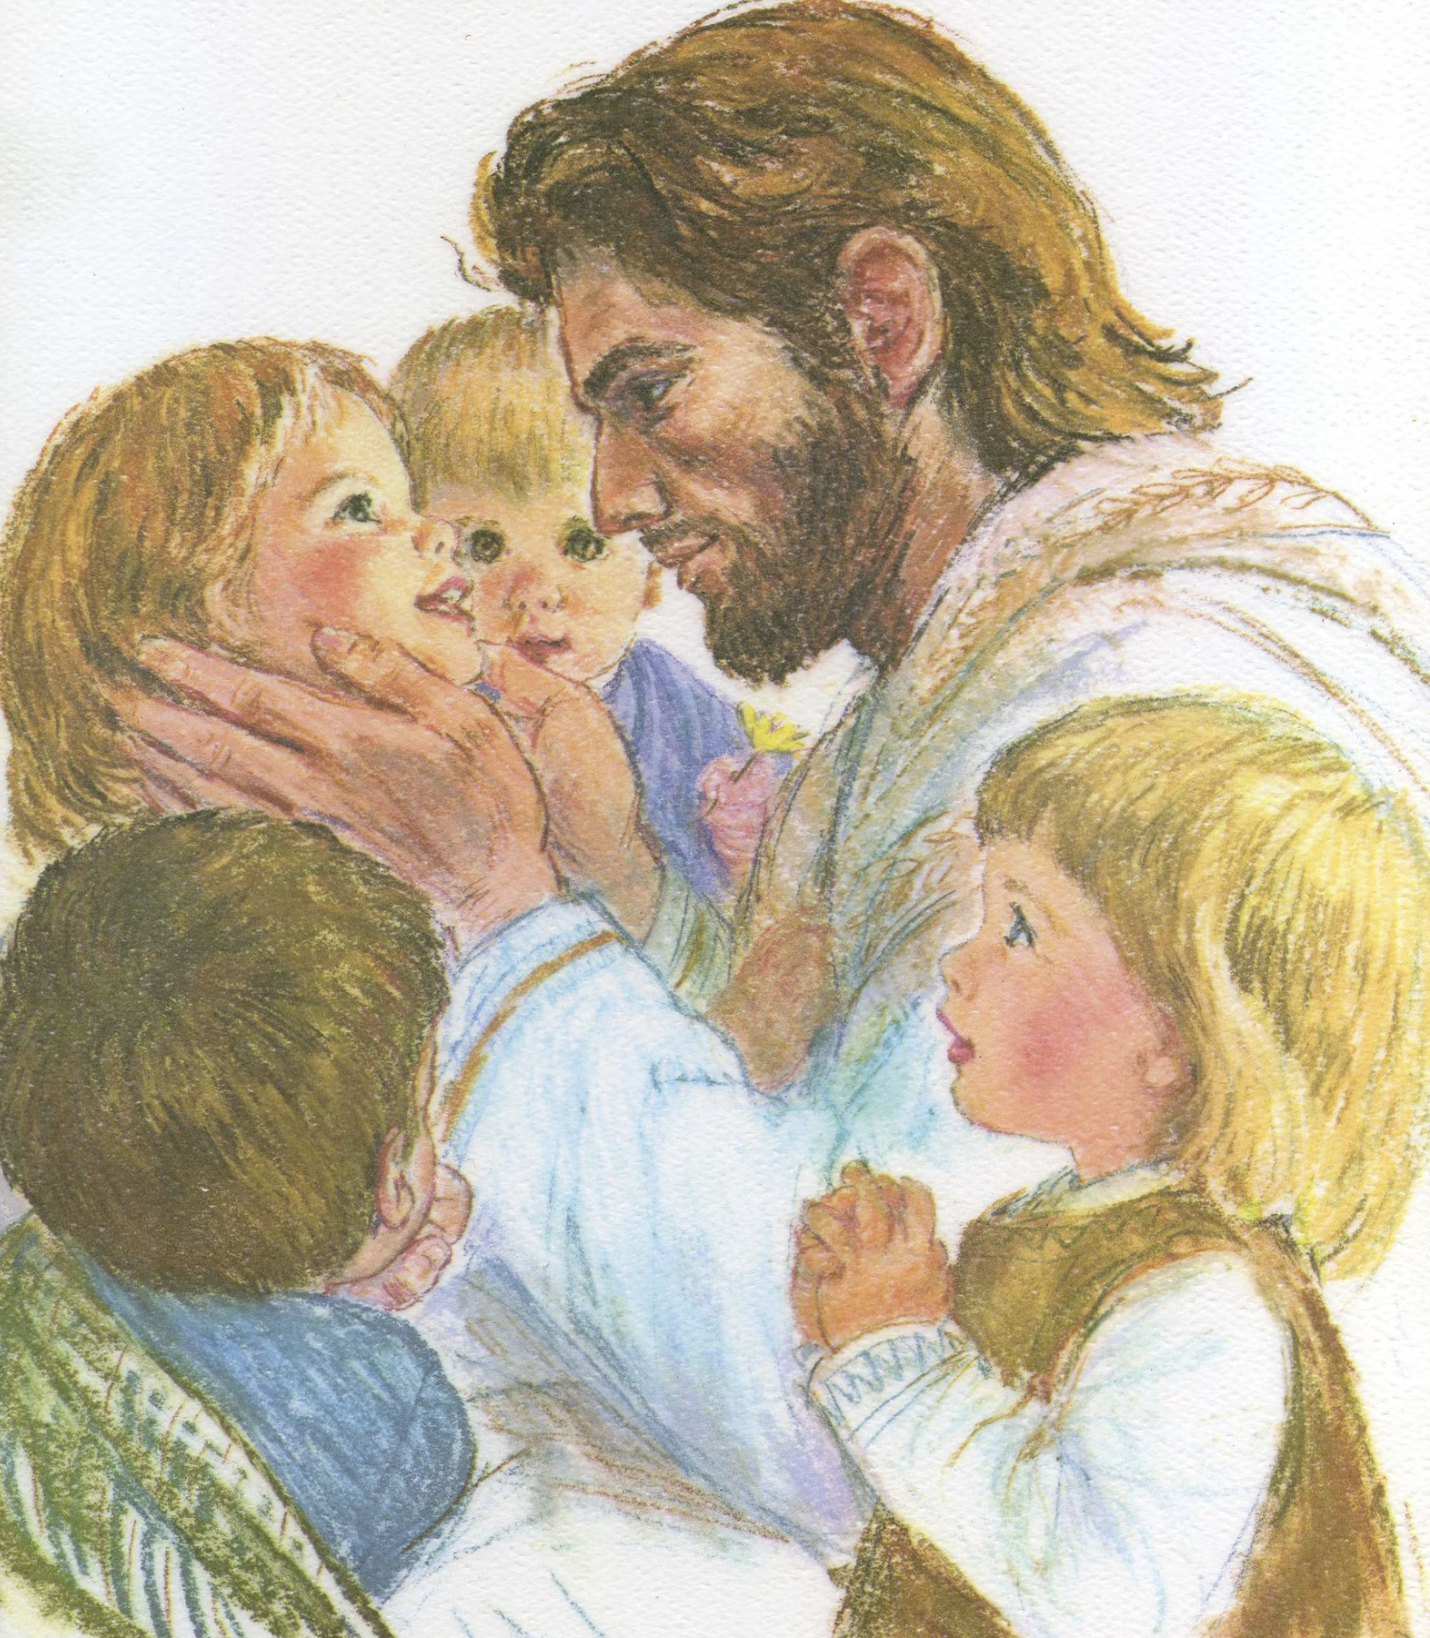 painting of Jesus with little children
